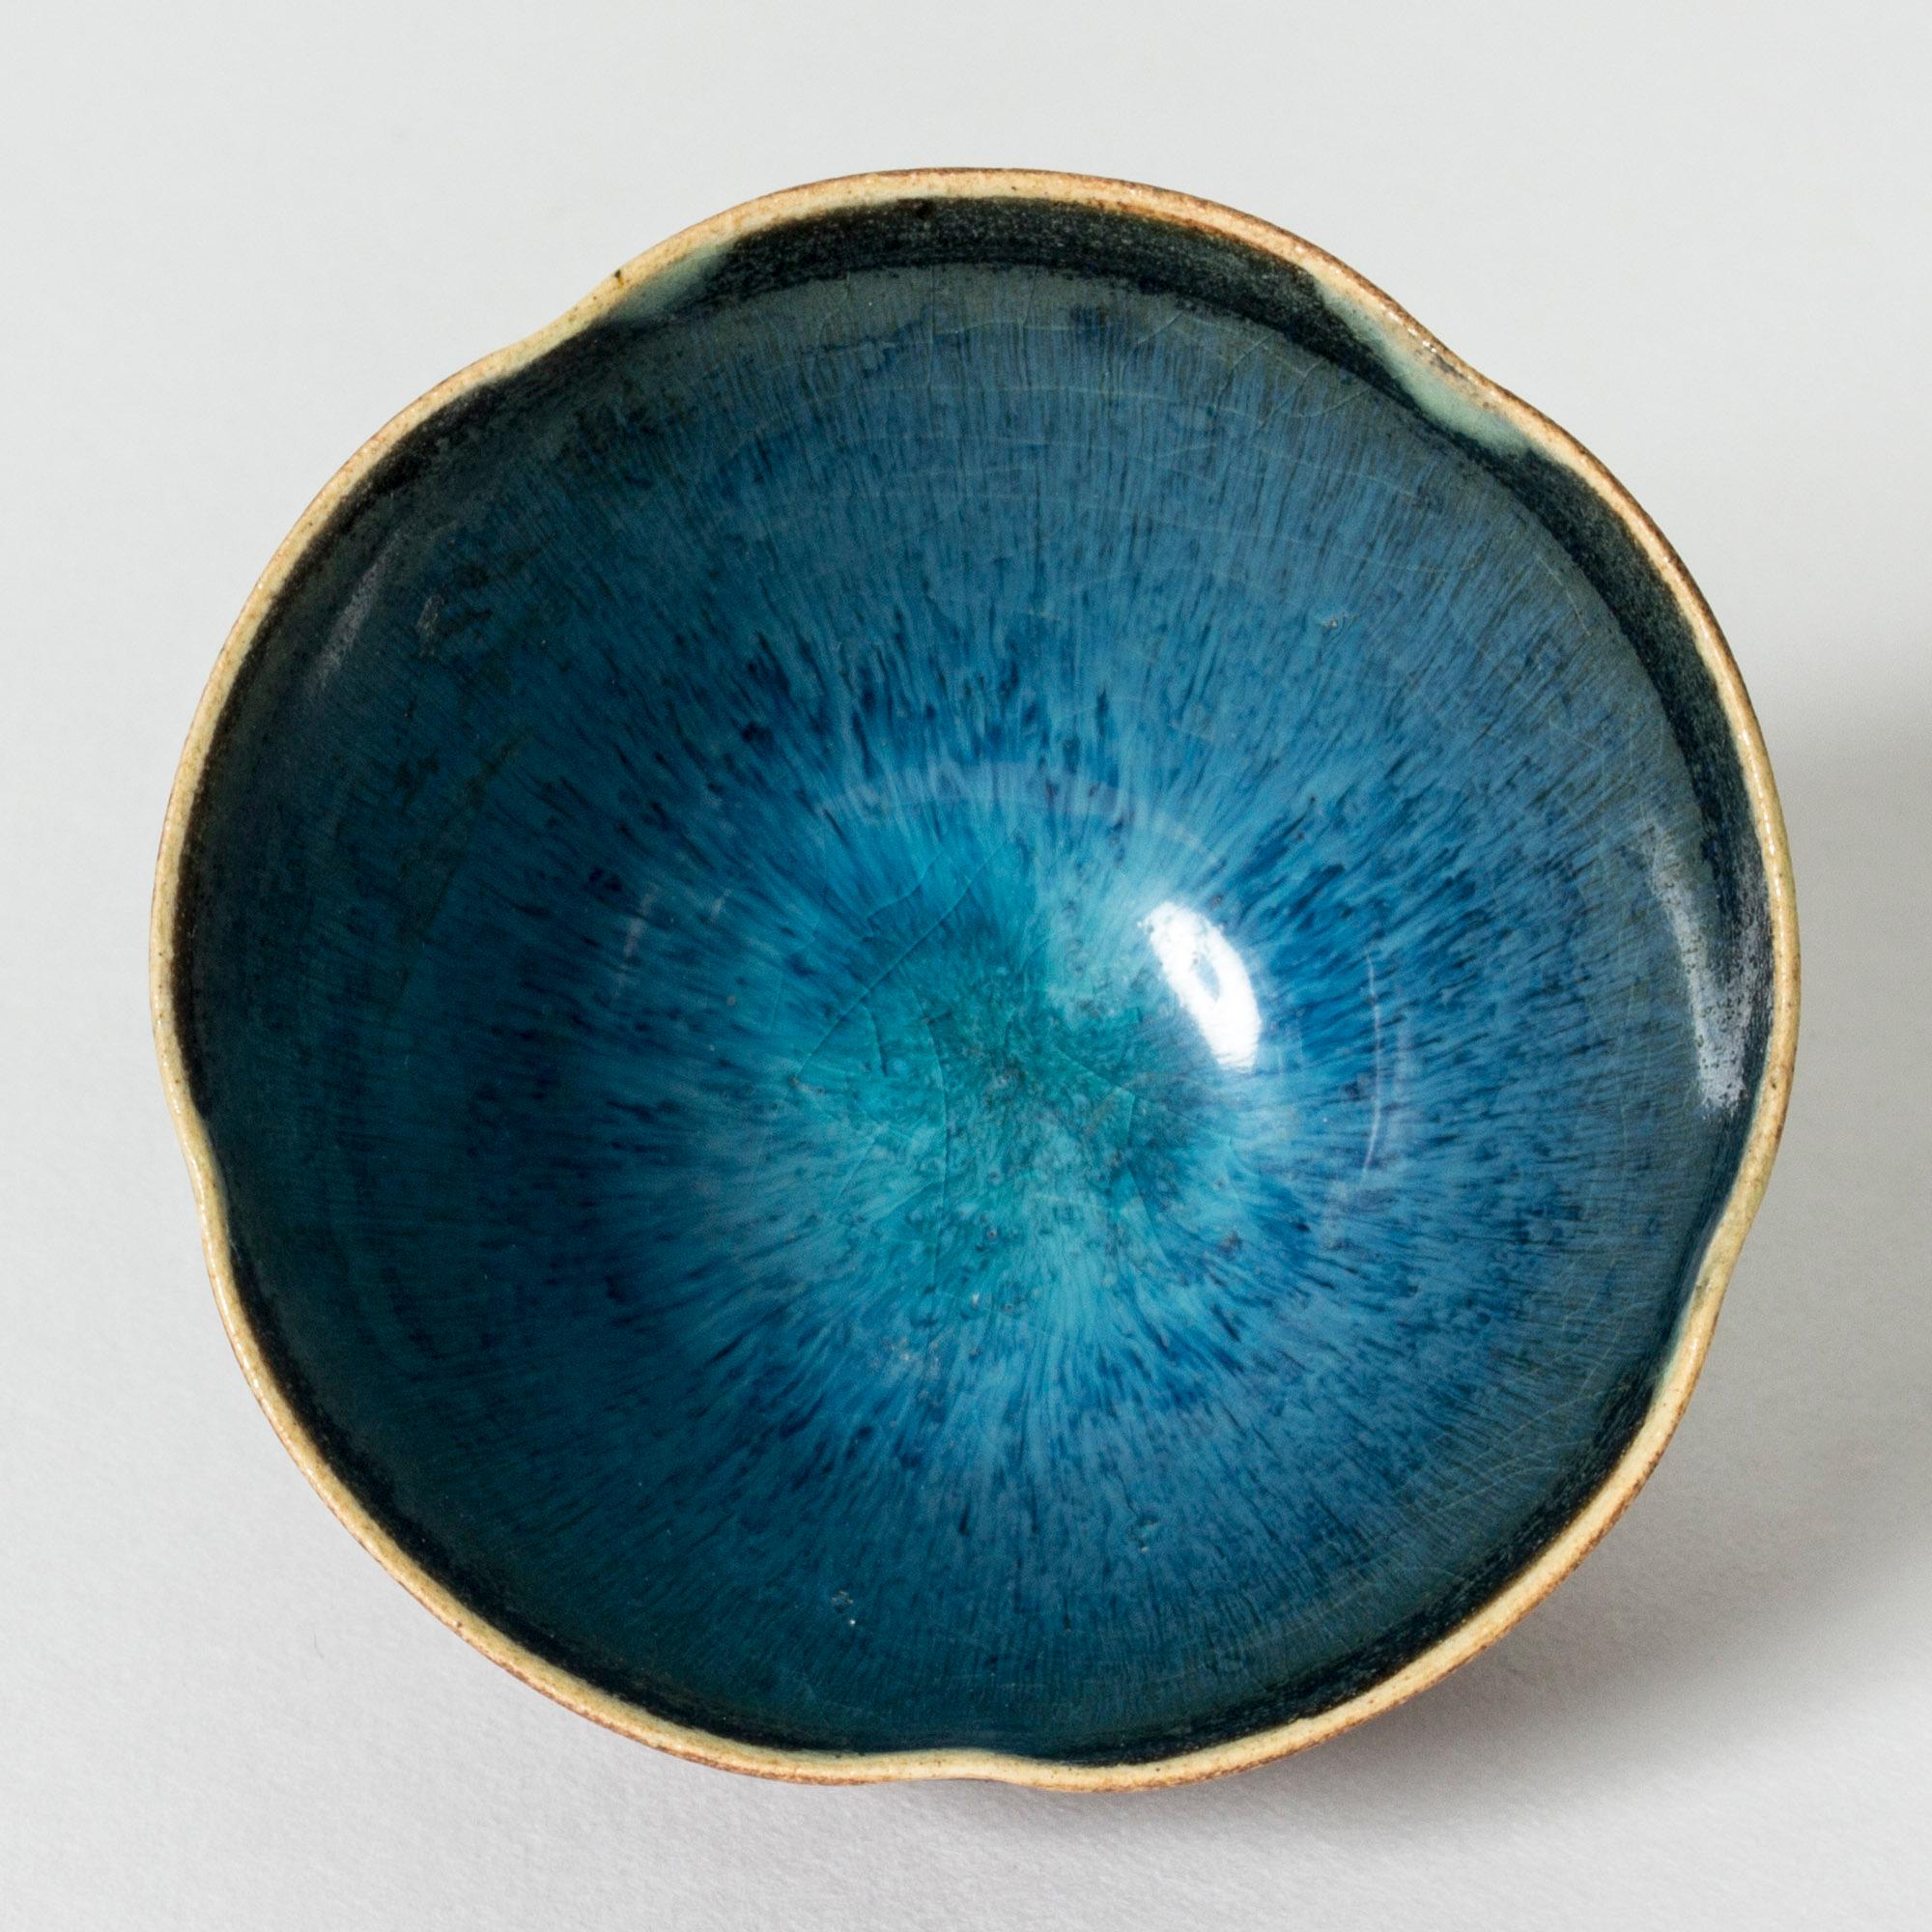 Lovely stoneware bowl by Wilhelm Kåge, in a small, sensitive form. Unglazed outside and inside in vibrant, glossy blue.

“Farsta” stoneware is recognized as being the best and most exclusive that has come out of Swedish arts and crafts. The series